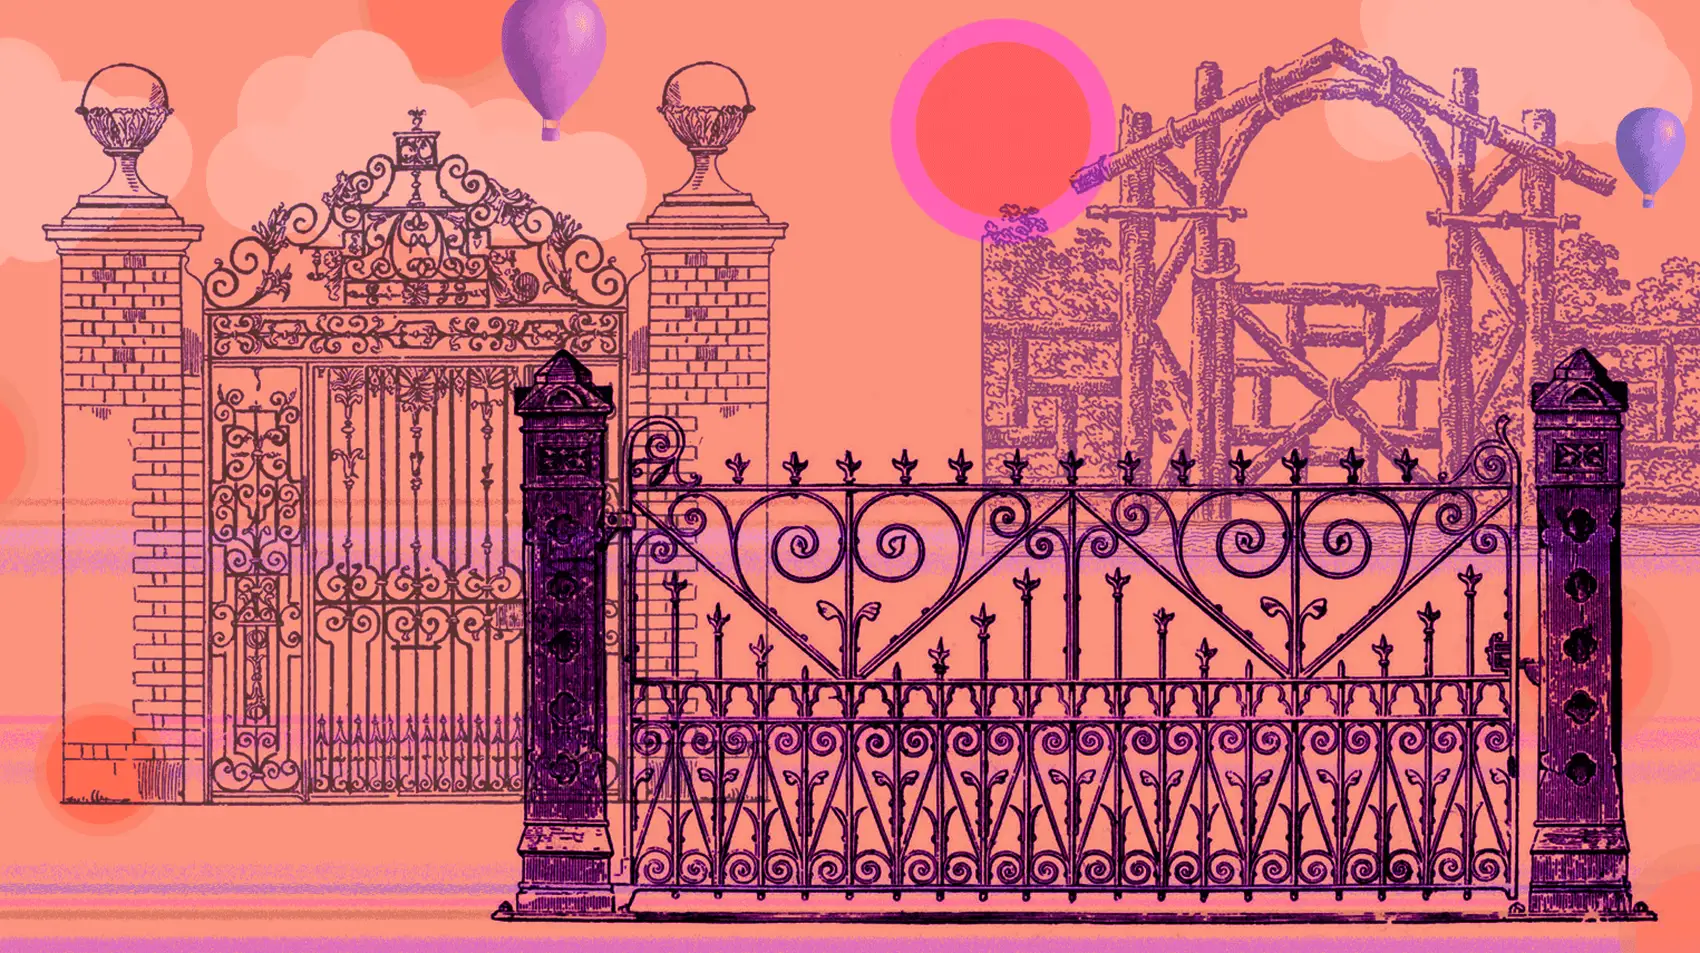 Three different gates stand below a backdrop of late afternoon sky. Purplish air balloons, clouds, and a setting sun can be seen floating above the gates. The first gate's post is brick like, the second gate's is cement like, and the third gate's is pure wood.